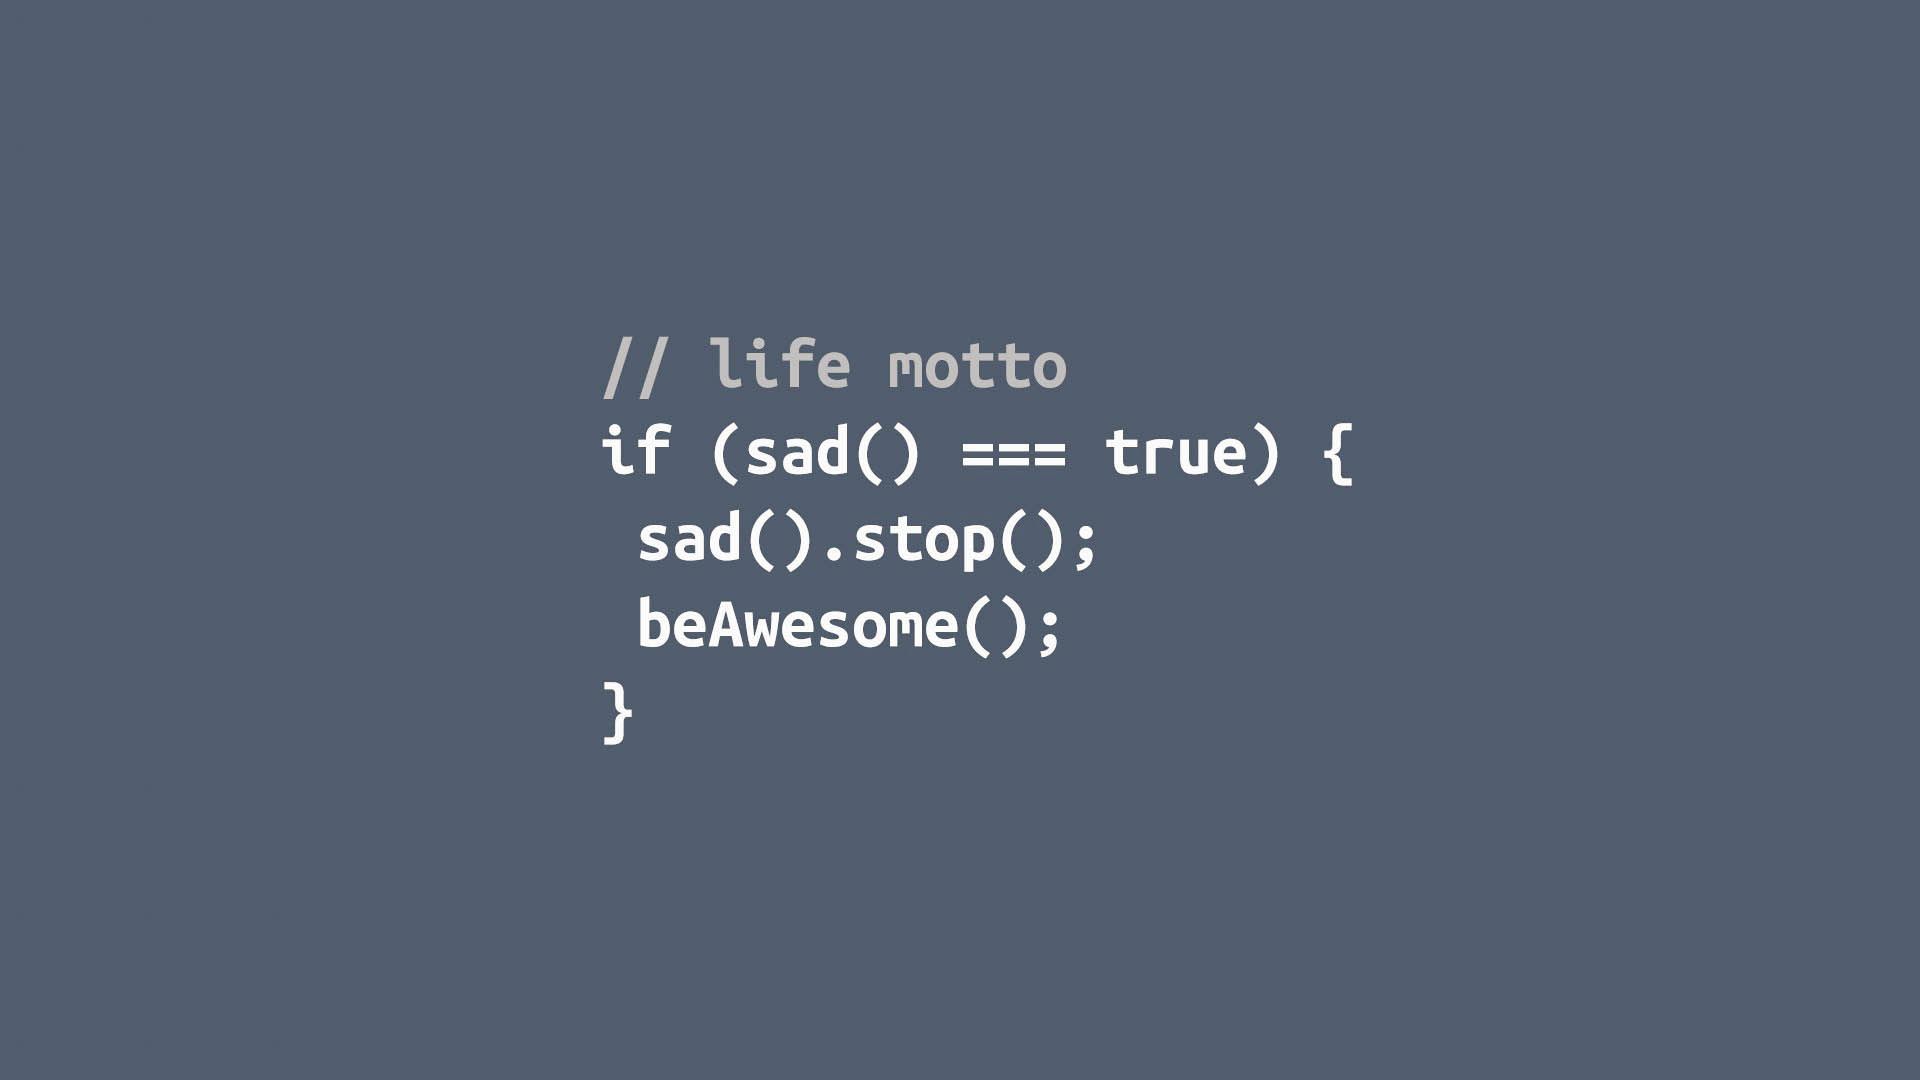 Code Image And Picture (Technology) HD Wallpaper. Coding quotes, Programming quote, Life motto